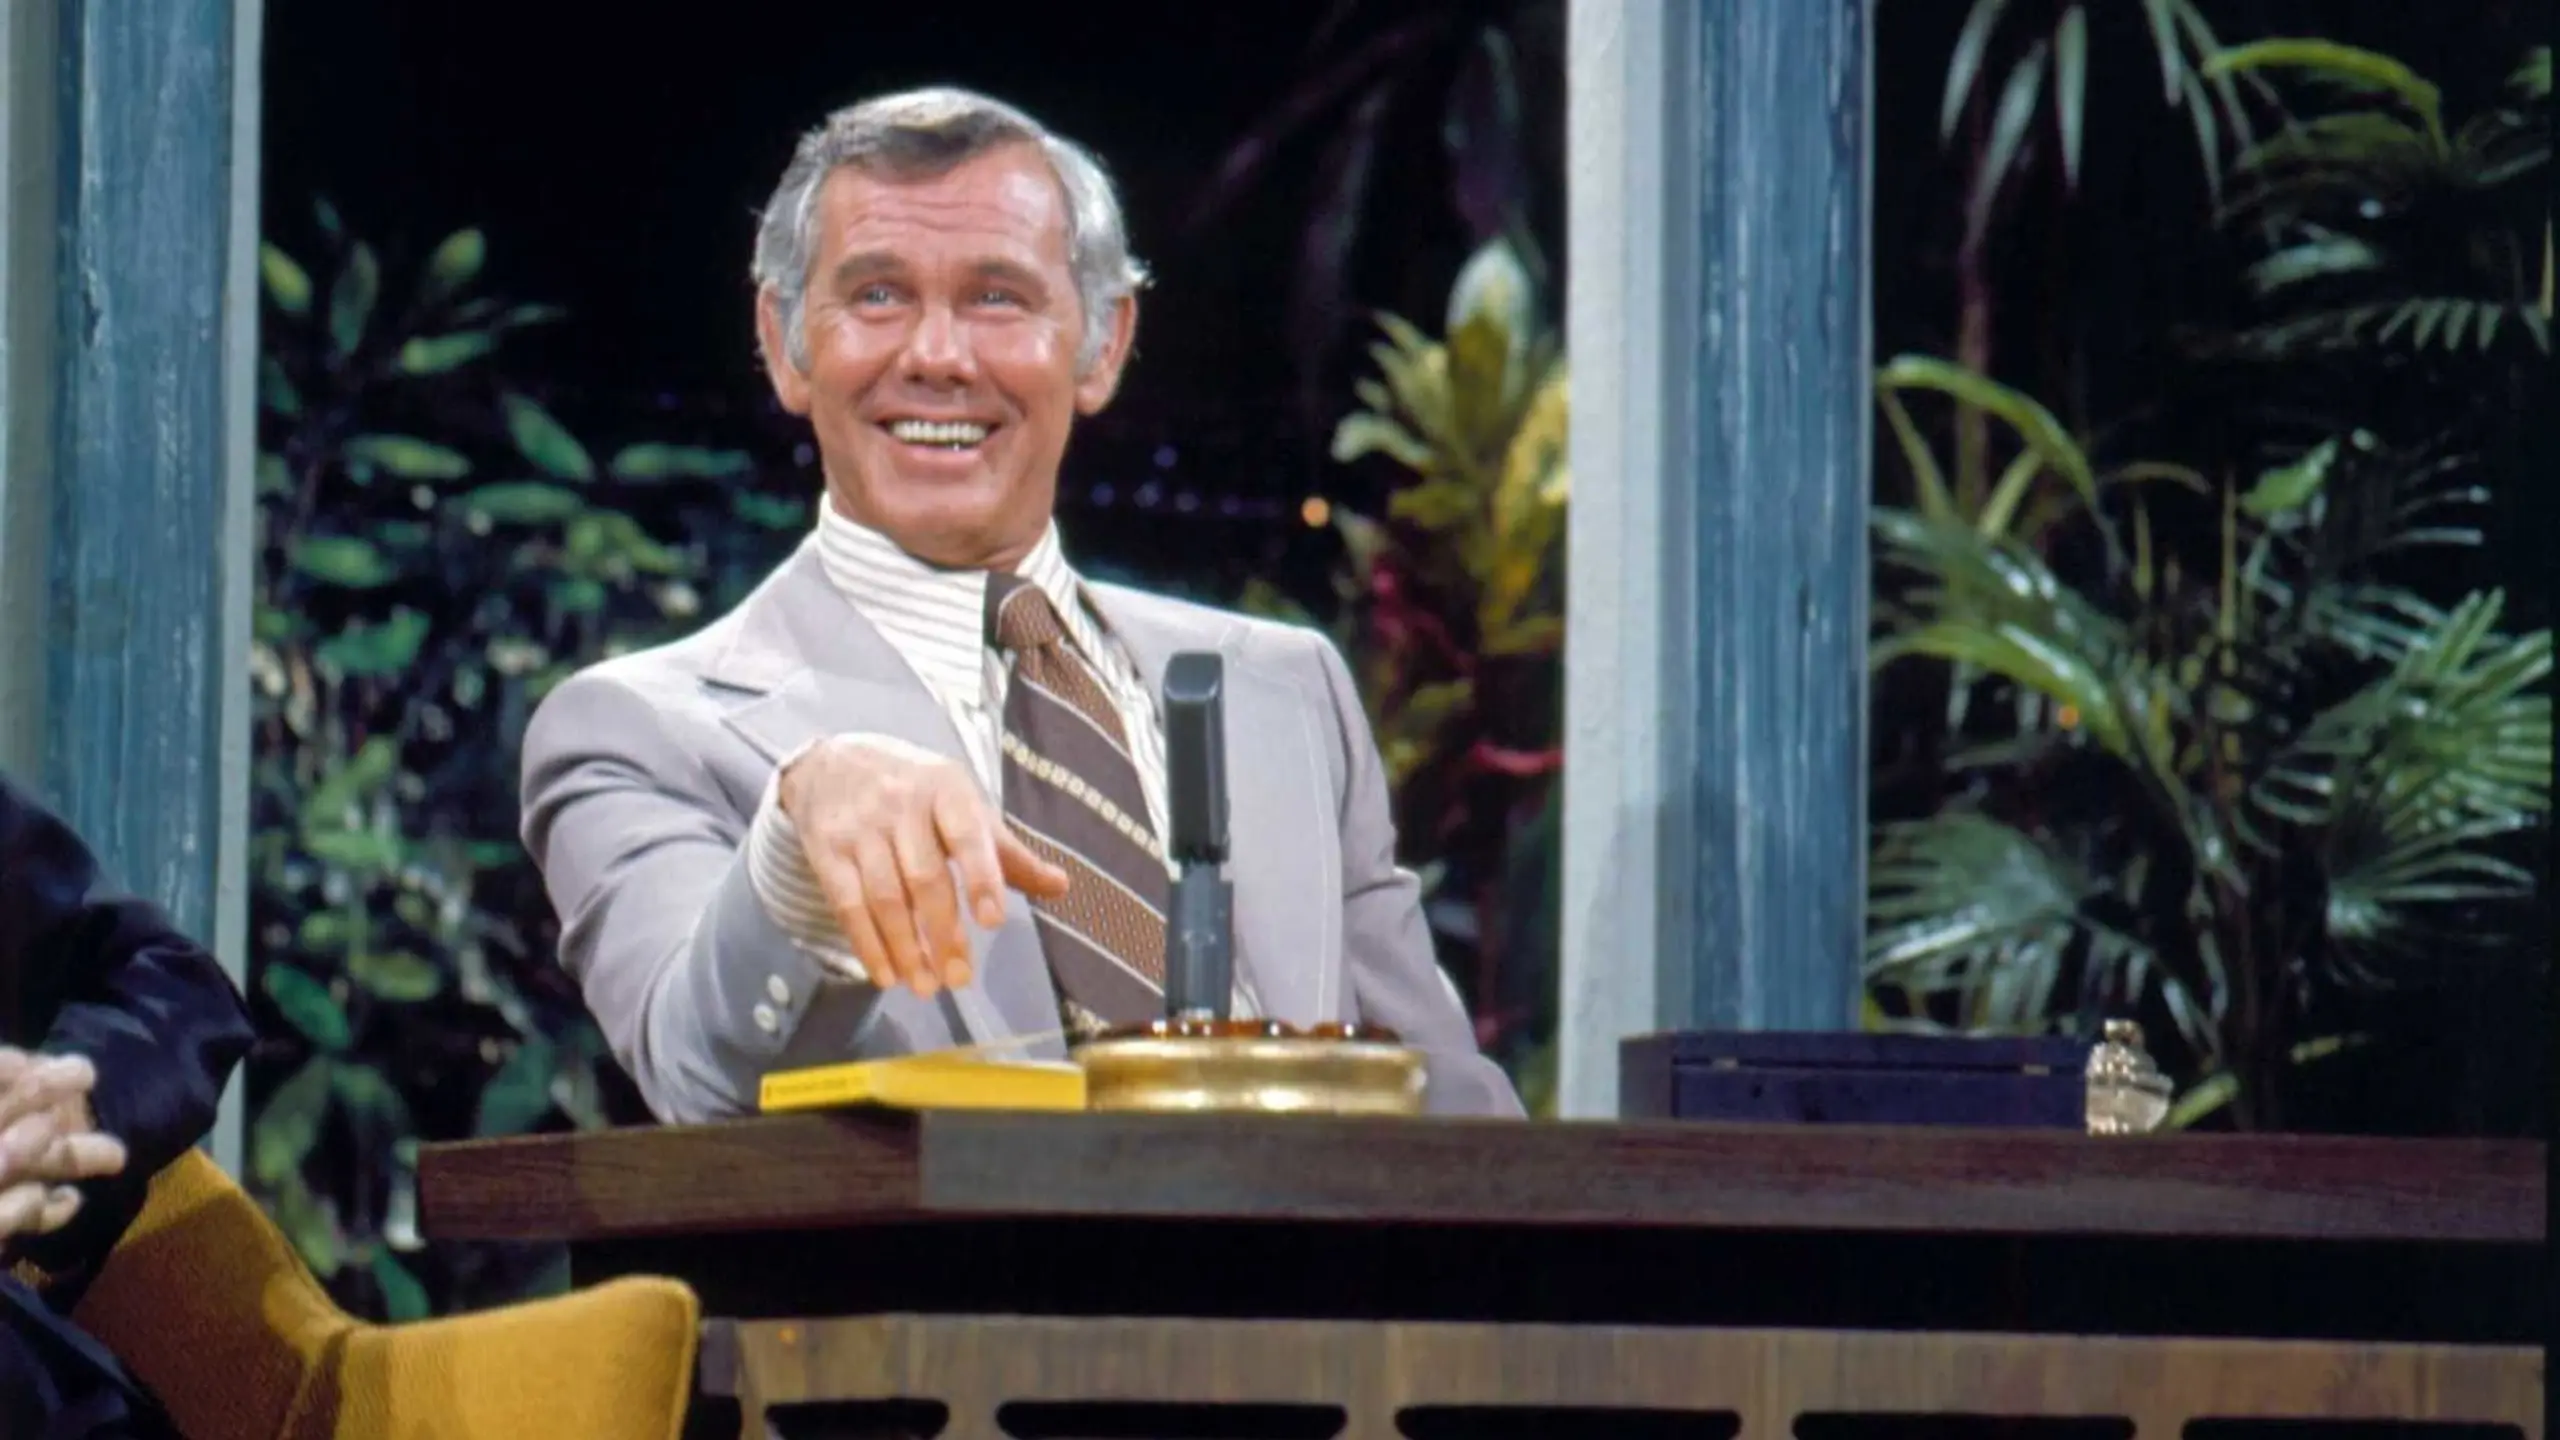 Johnny Carson: King of Late Night